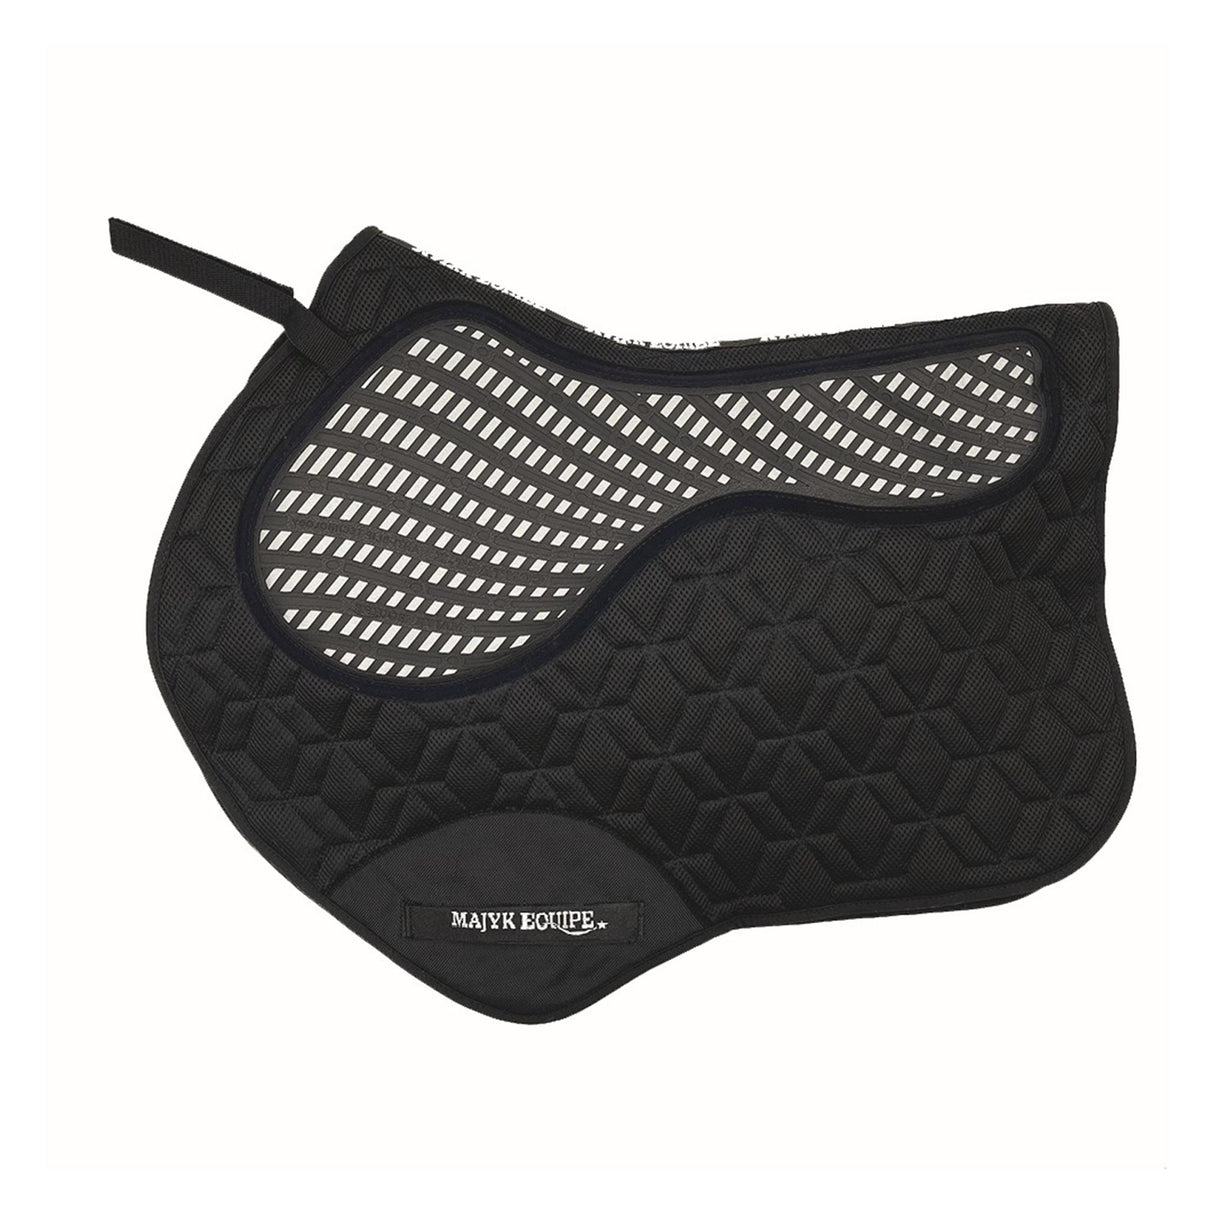 Majyk Equipe Jump Pad Non Slip Cool Mesh with Impact Protection Black